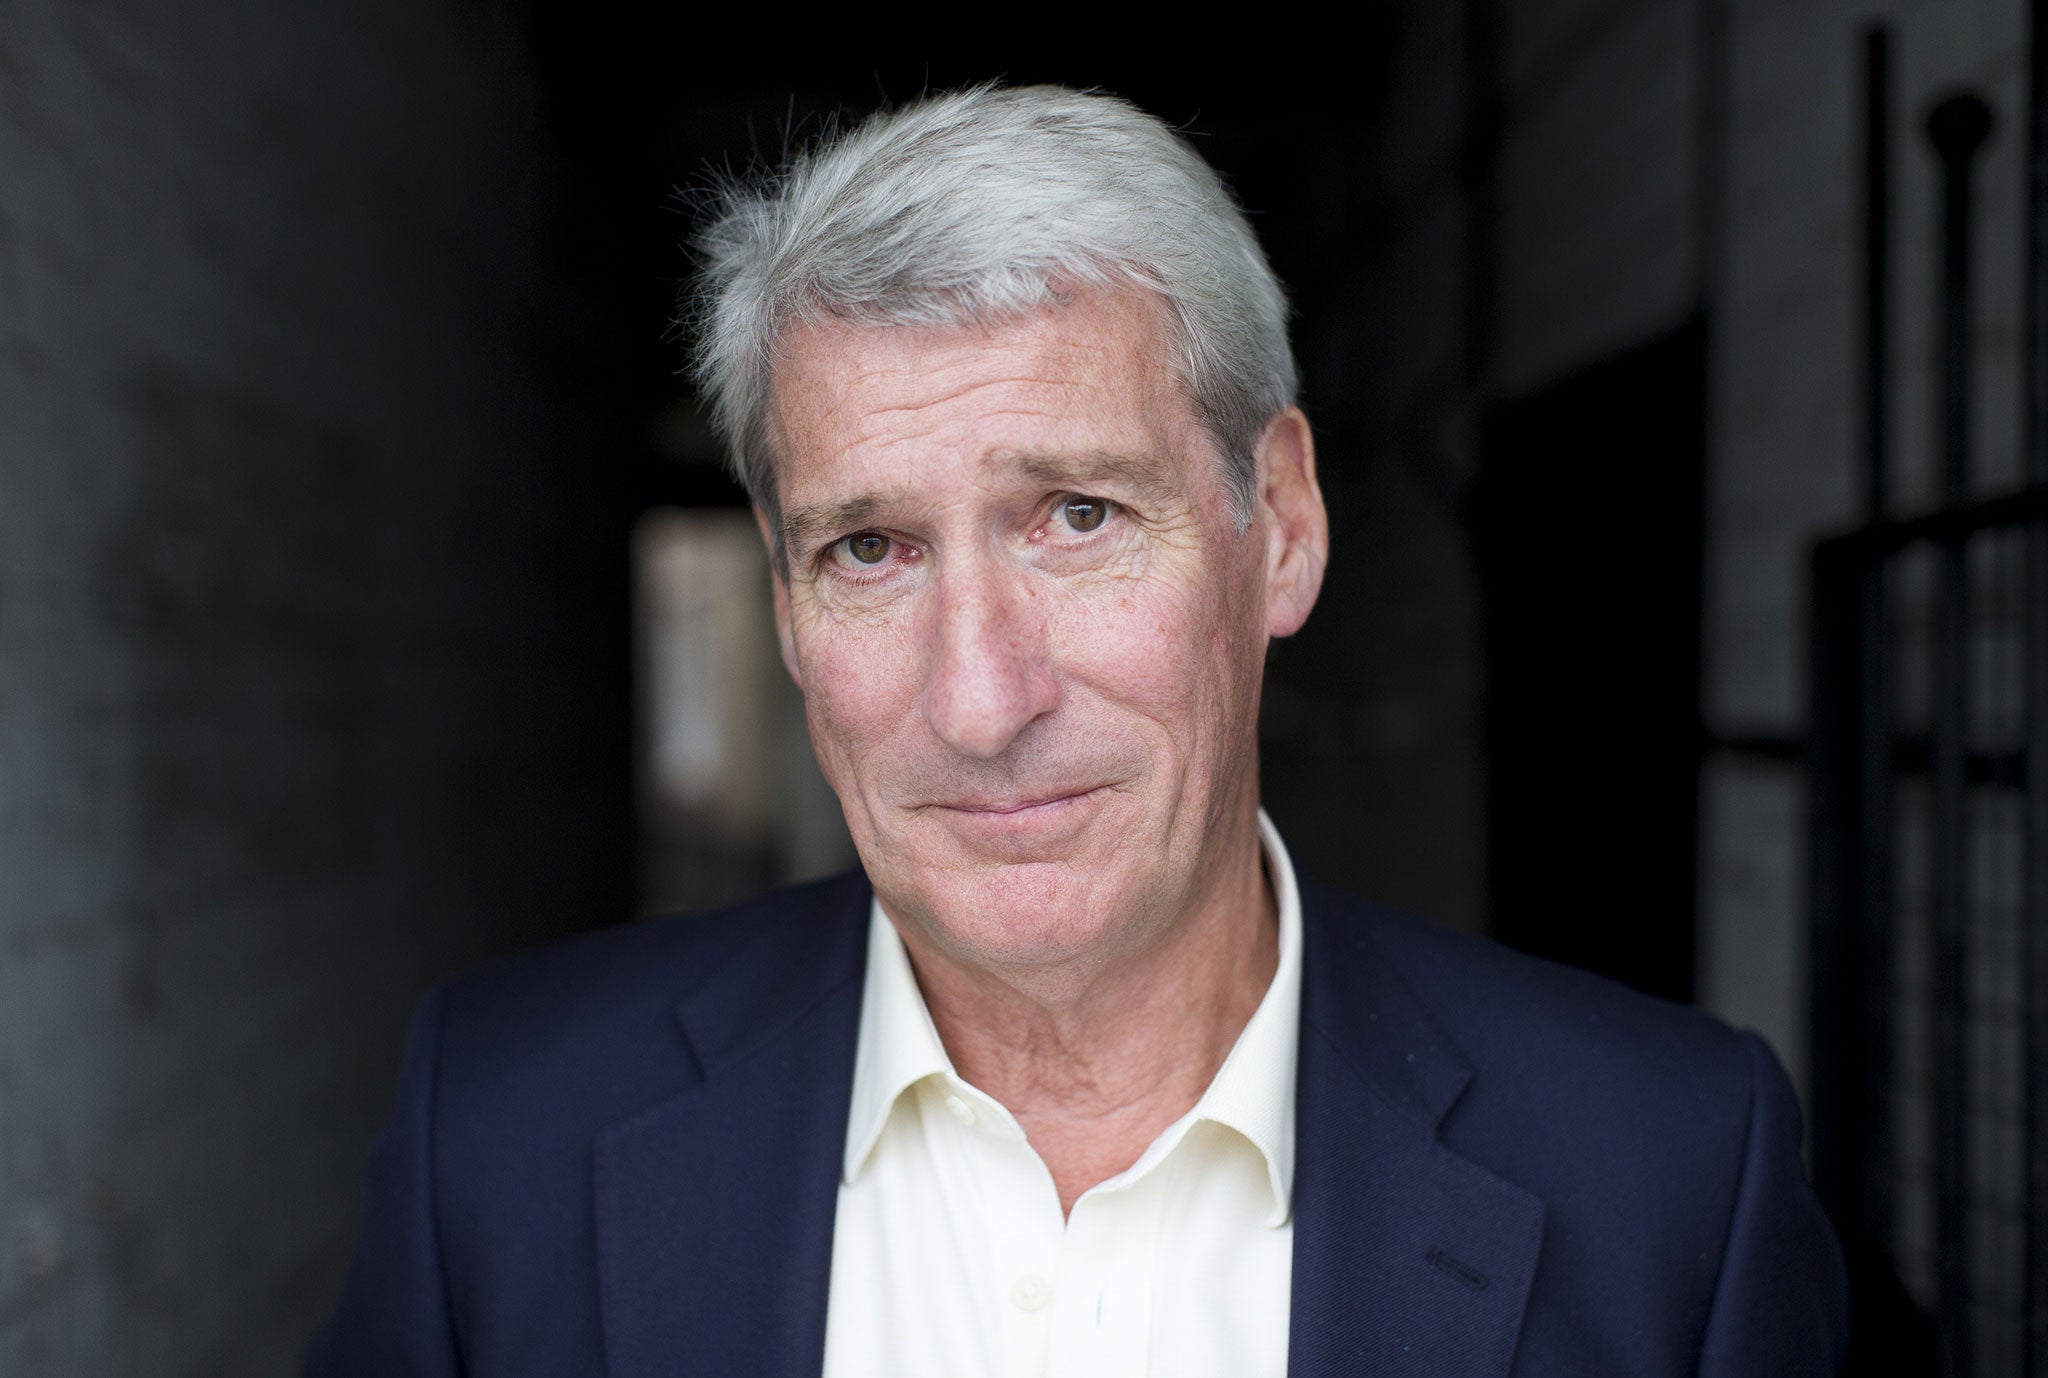 Jeremy Paxman who has described himself as a 'one-nation Tory', played down suggestions he might stand